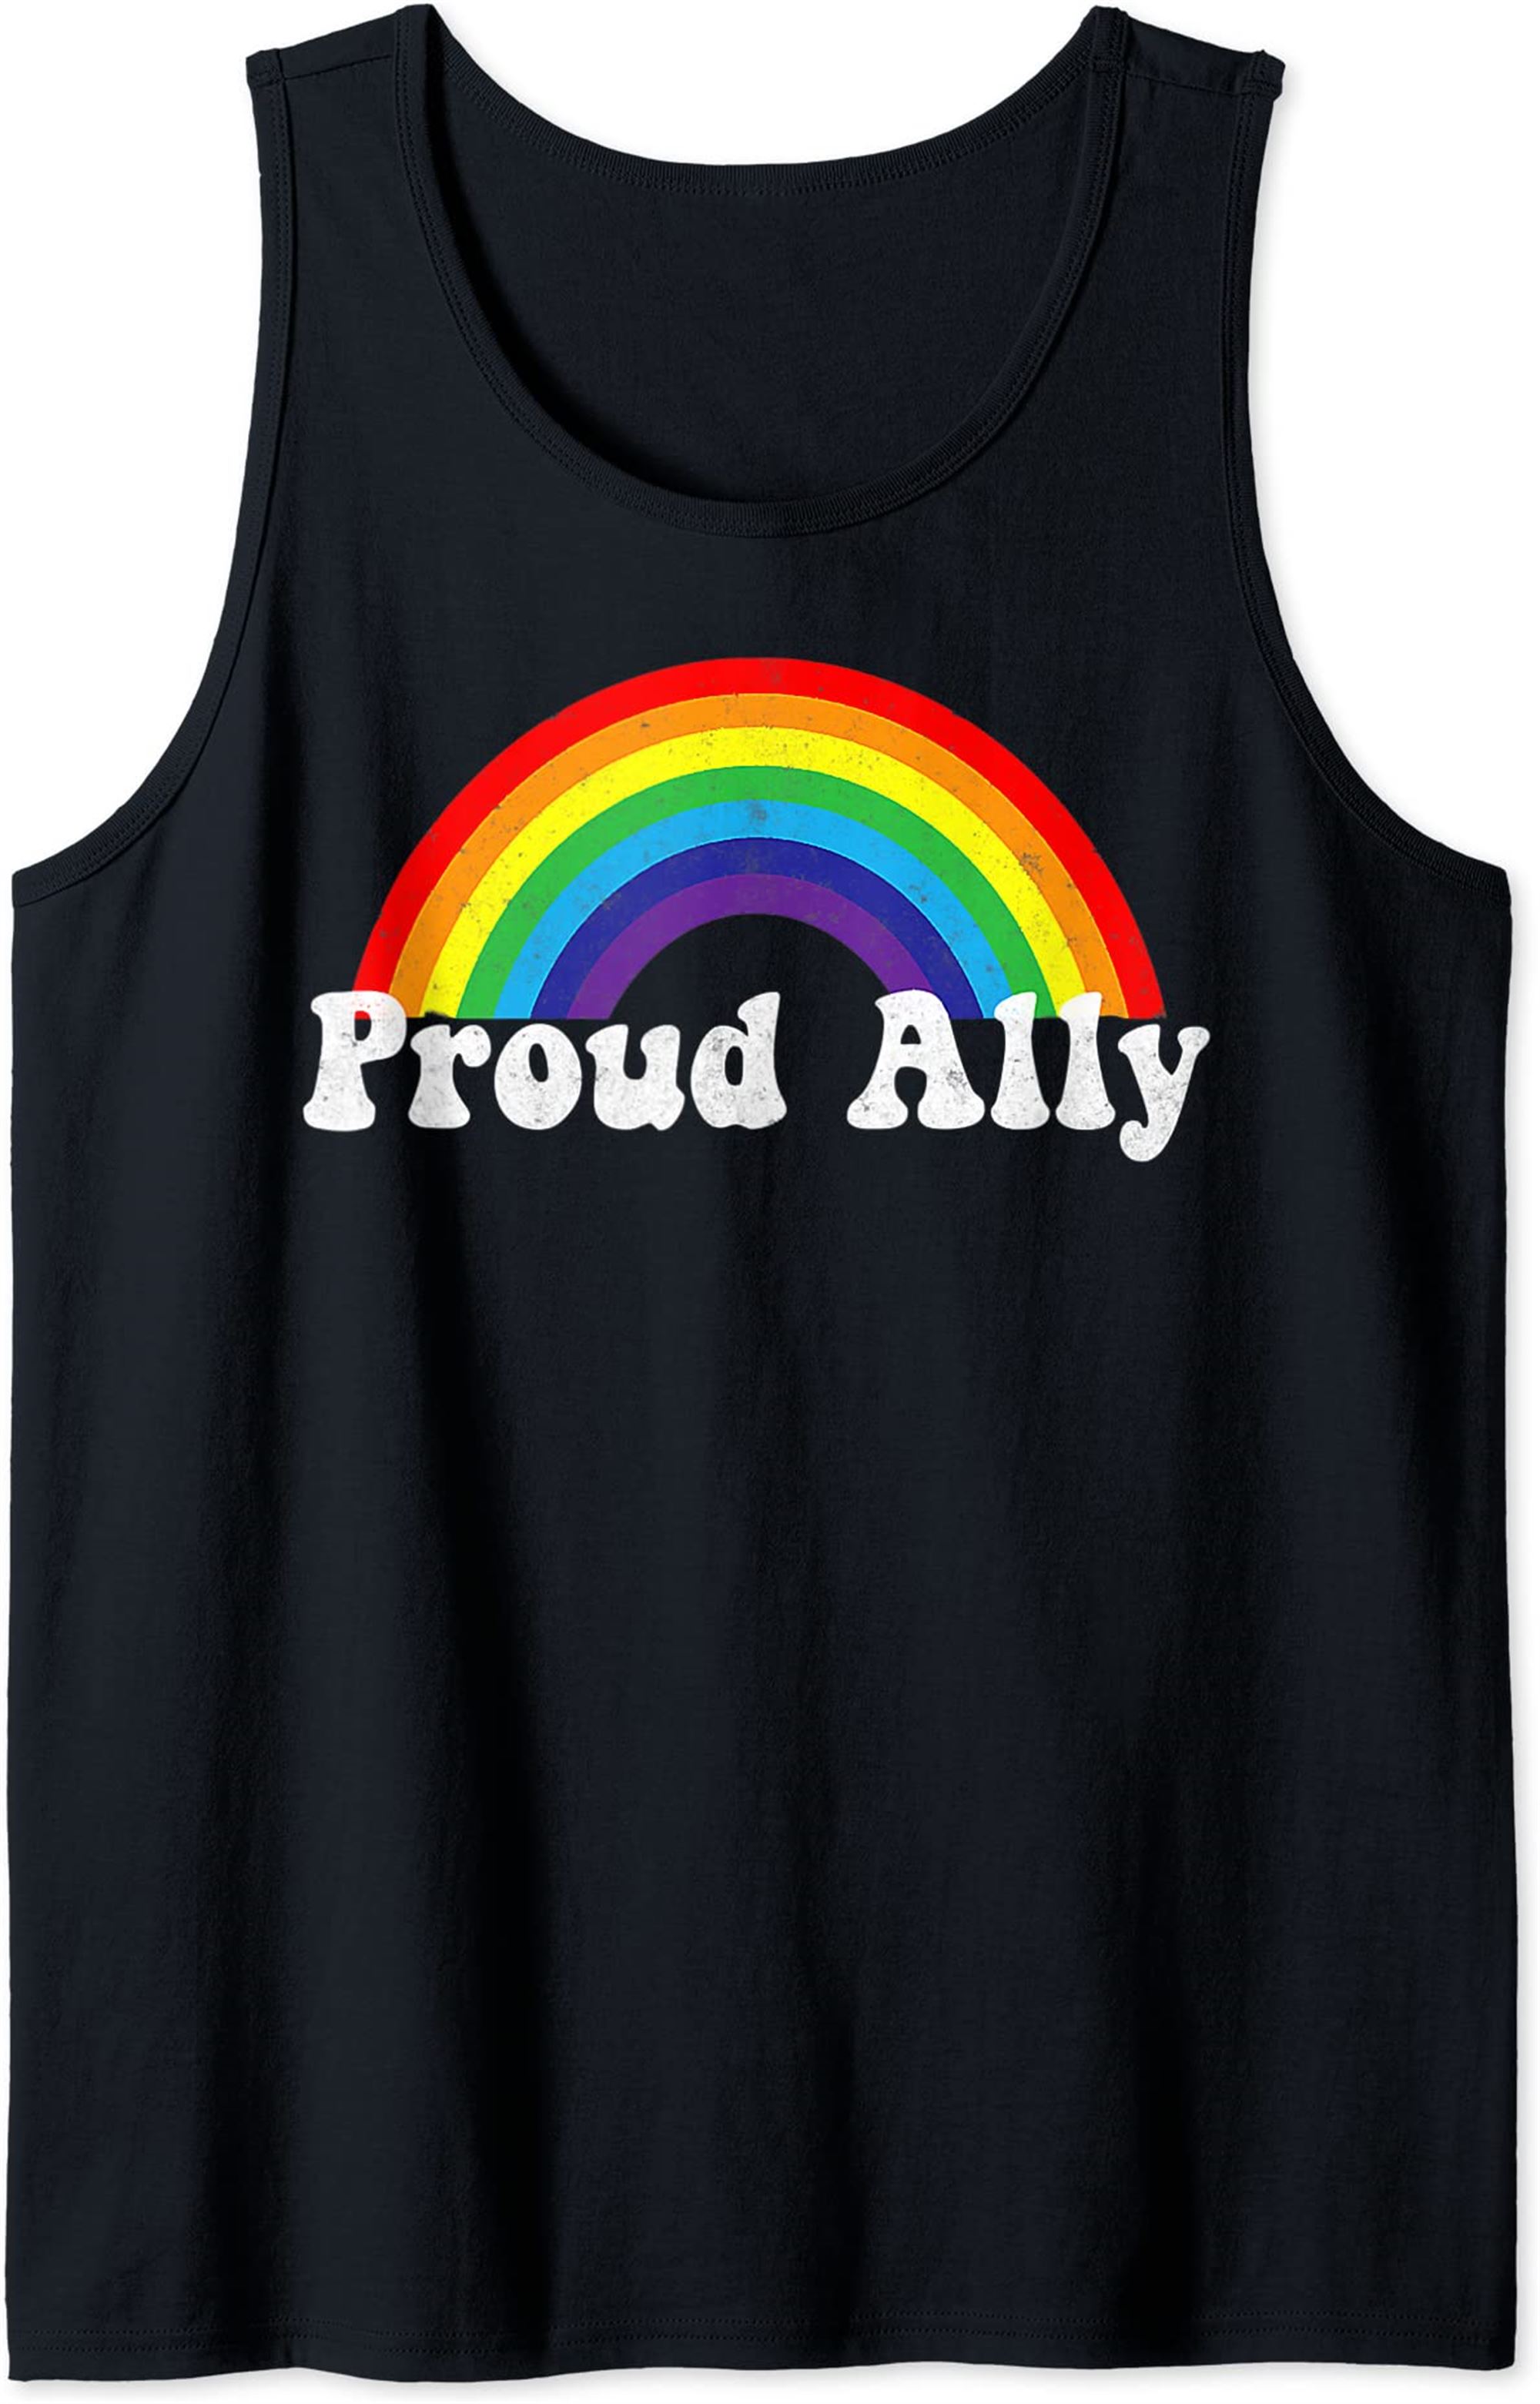 Proud Ally Pride Shirt Gay Lgbt Day Month Parade Rainbow Tank Top Plus Size Up To 5xl